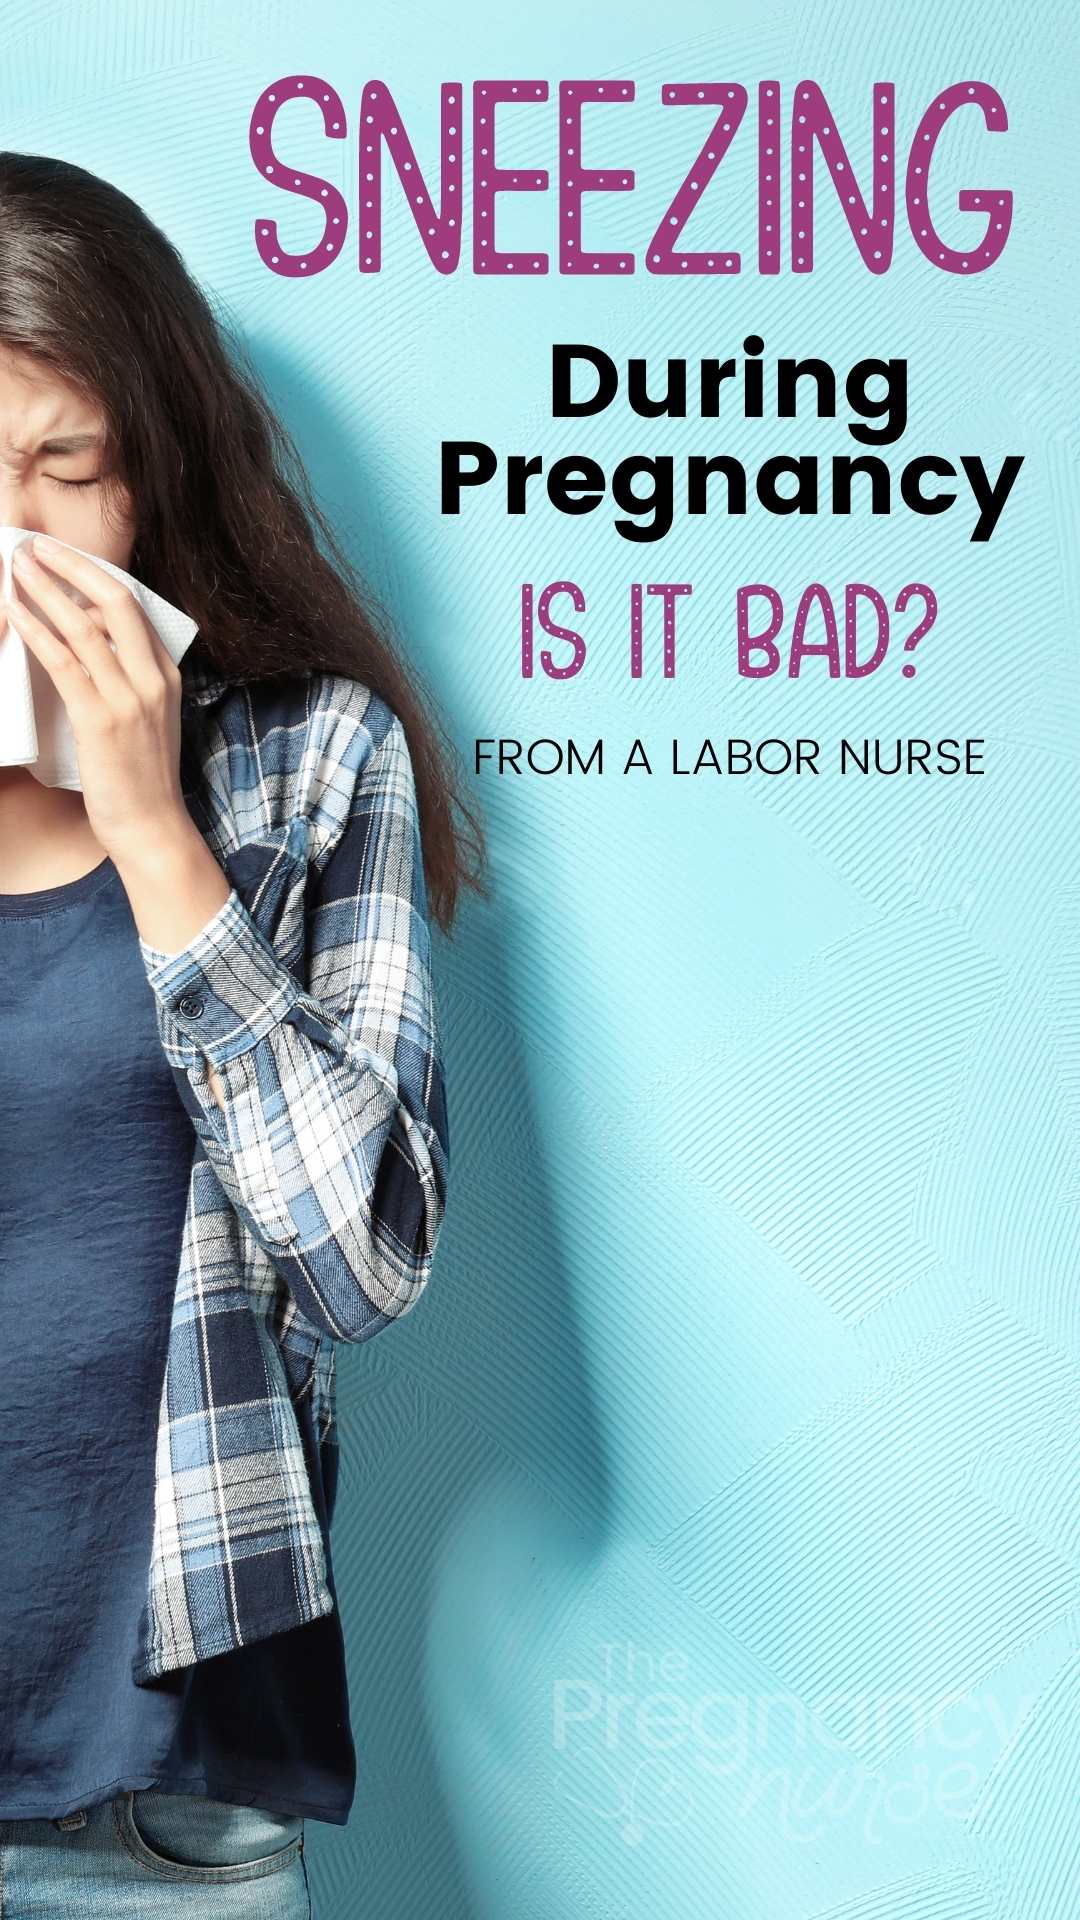 Is it safe to sneeze during pregnancy? What are the risks? In this blog post, we will explore the possible risks associated with sneezing during the first trimester of pregnancy. We will also provide some tips on how to minimize these risks. Stay safe and healthy, everyone!